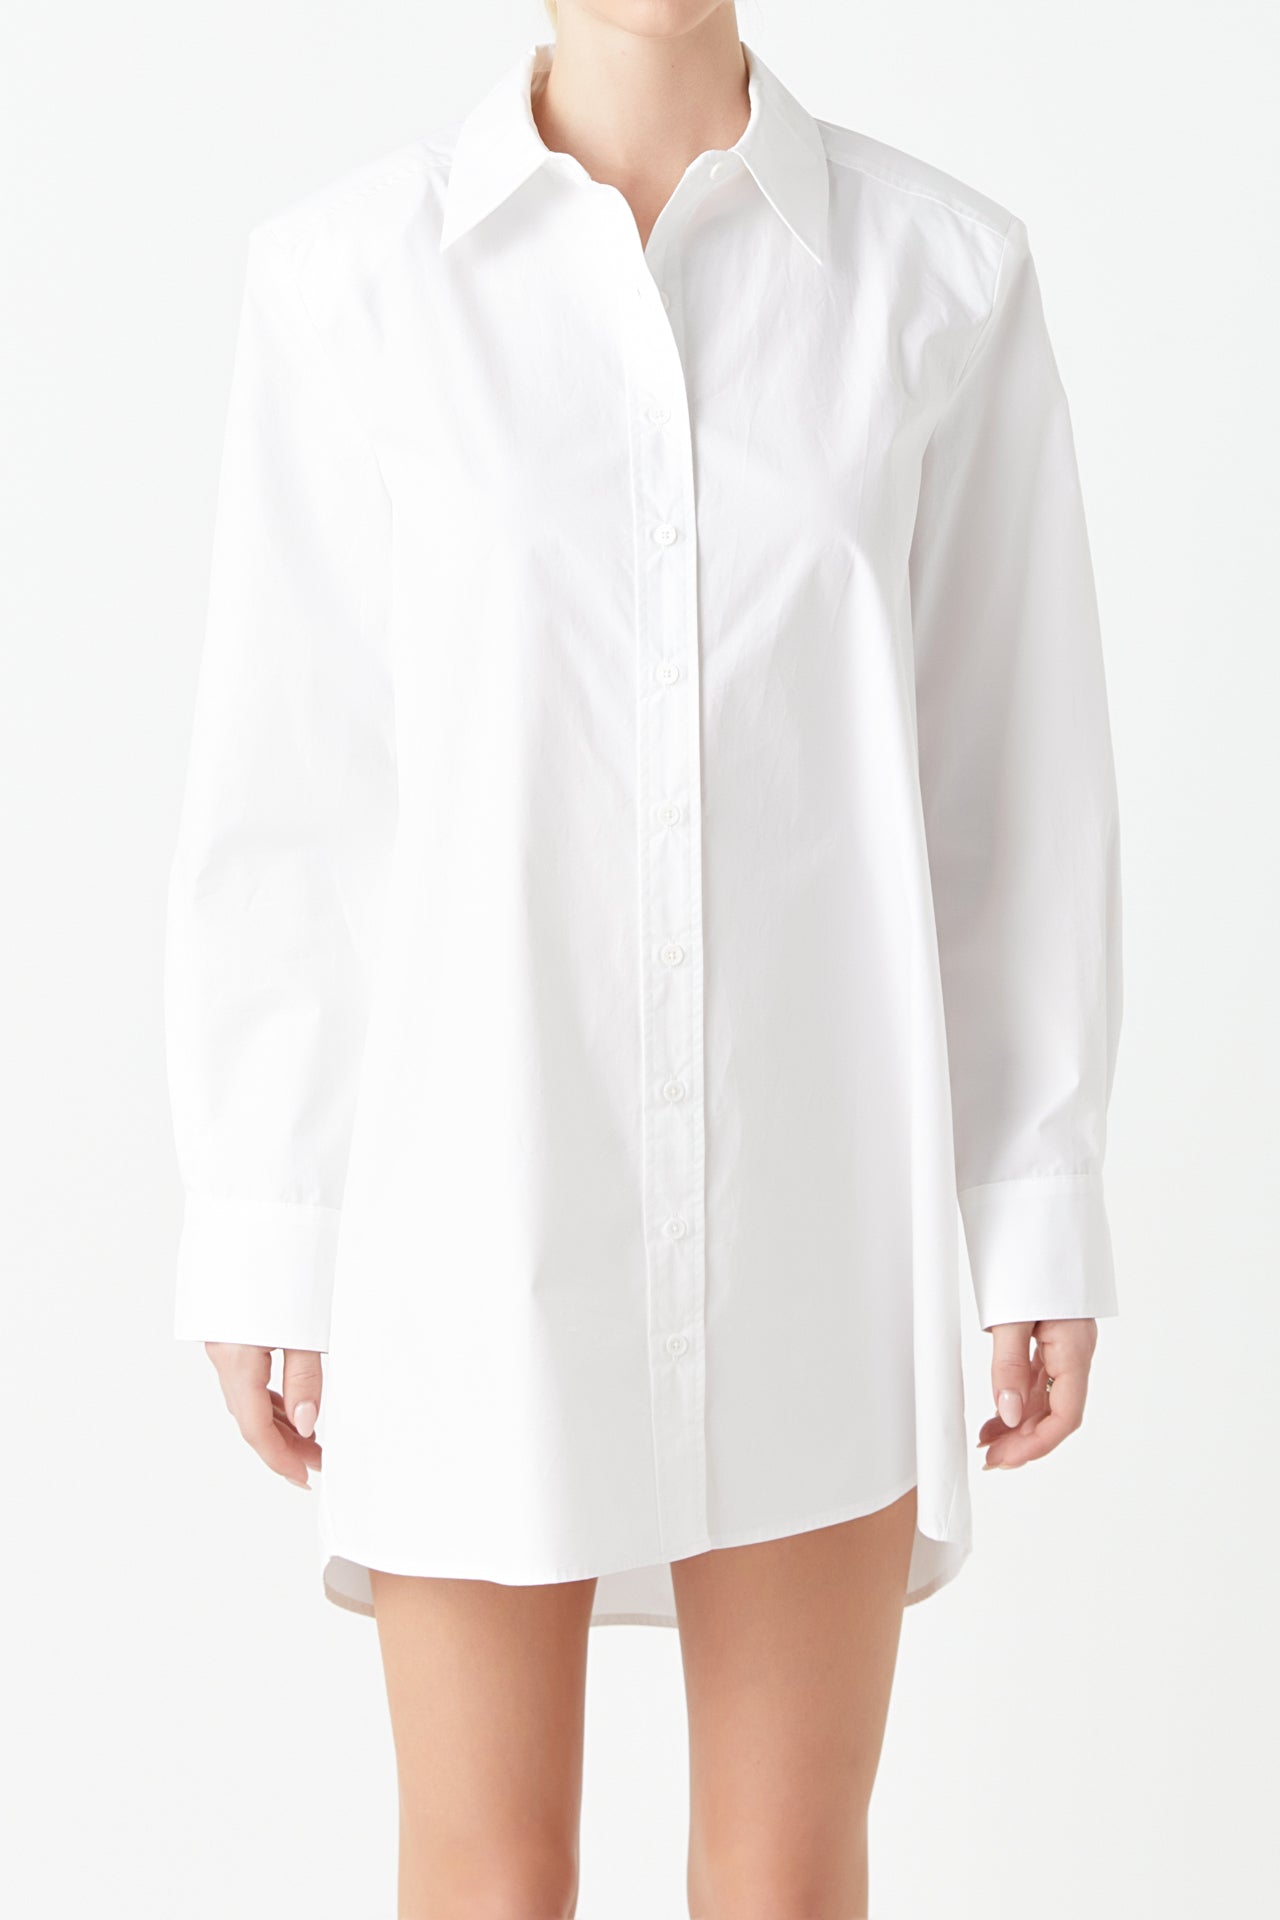 GREY LAB - Shirt Mini Dress - DRESSES available at Objectrare